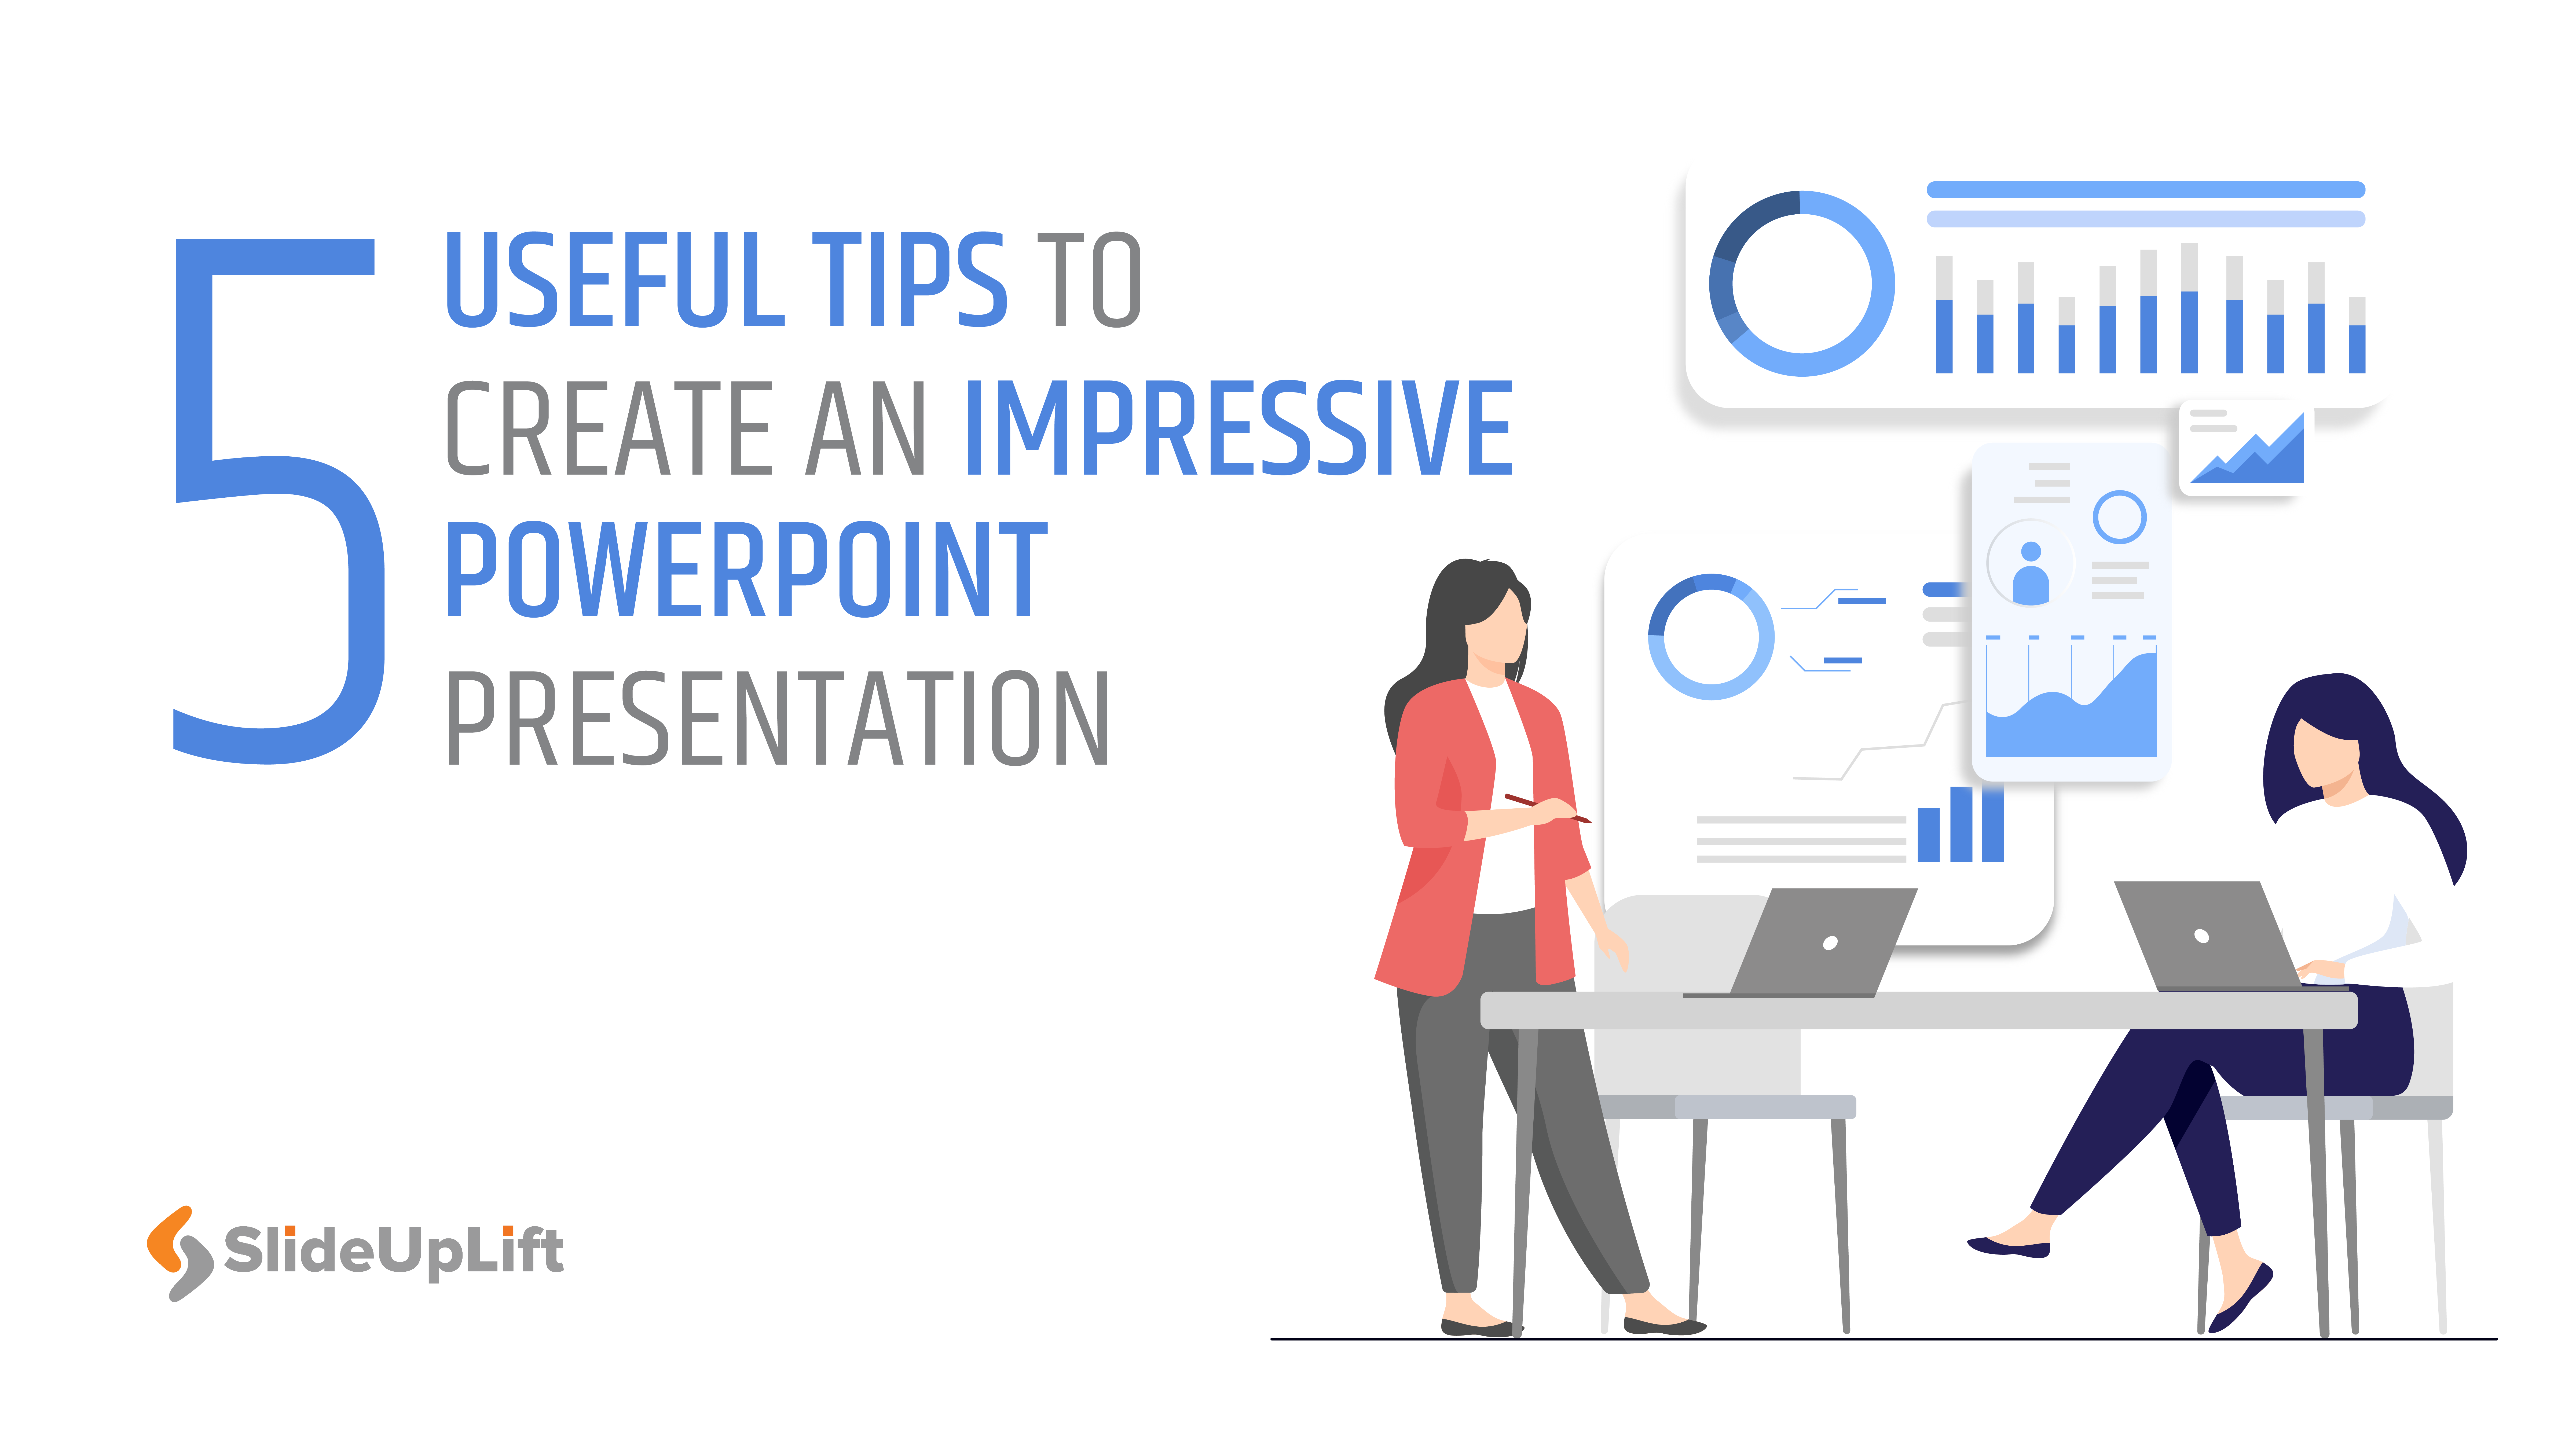 5 Useful Tips To Create an Impressive PowerPoint Presentation